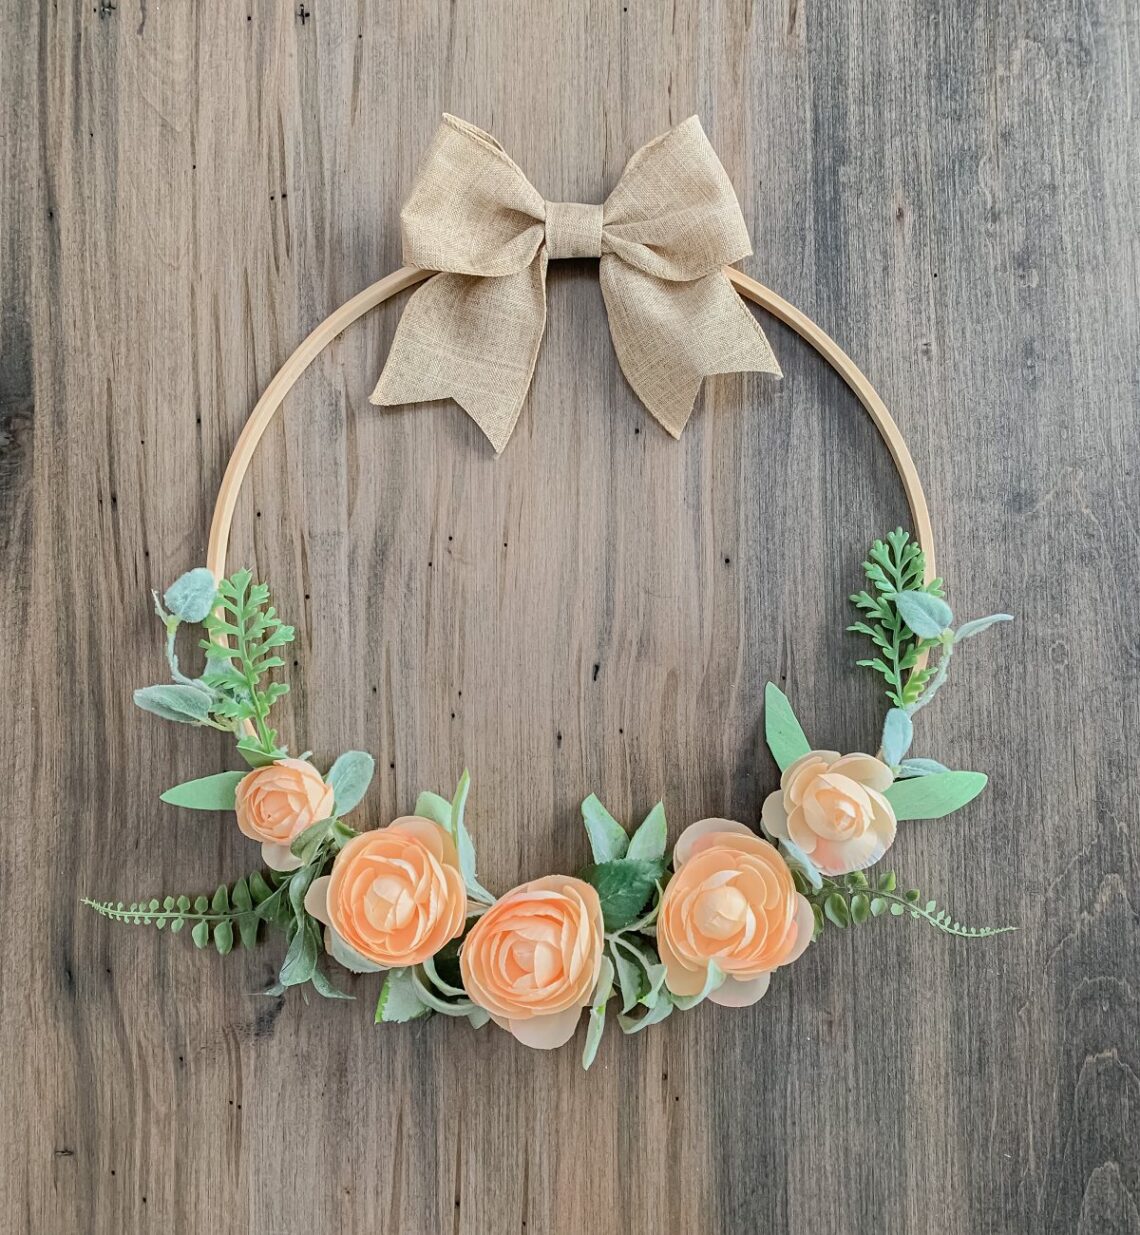 floral embroidery hoop wreath with greenery and peach flowers for spring to summer decor